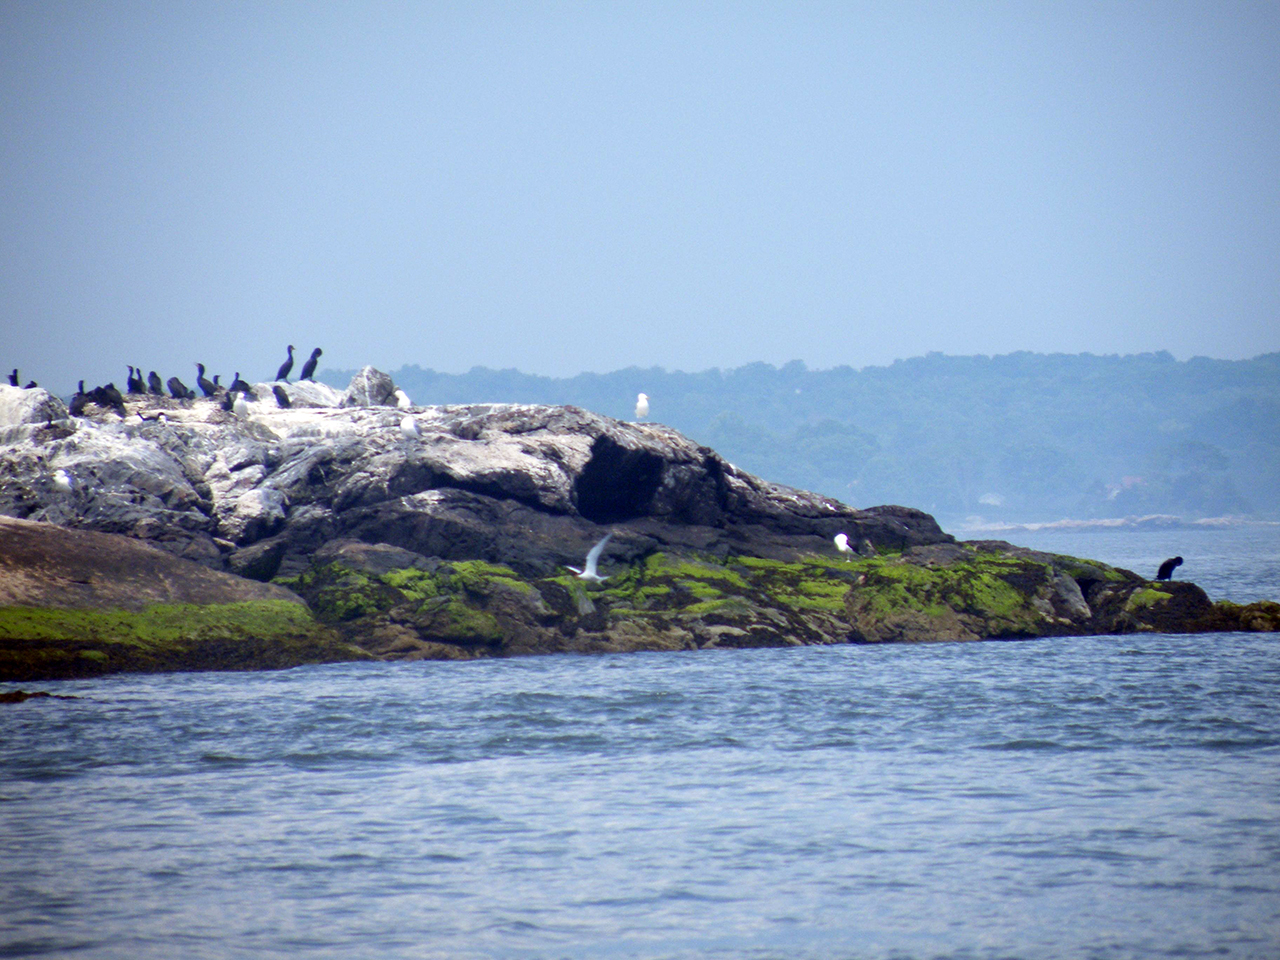 and we even own a few Rocks & Reefs, which provide resting spots for many birds.